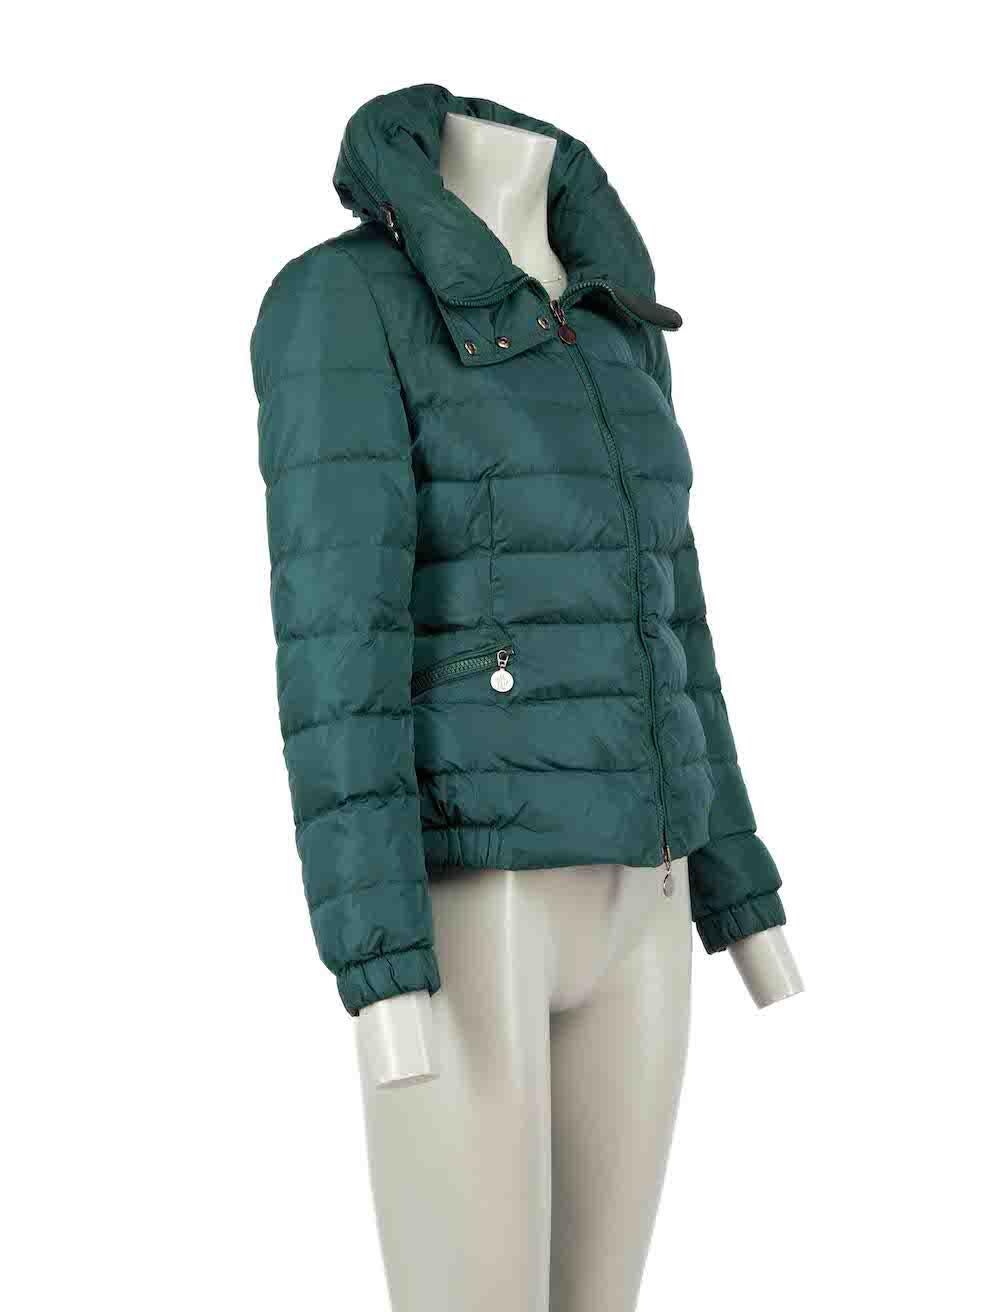 CONDITION is Good. Minimal wear to coat is evident. Minimal wear to the right underarm lining with the unstitching of the seam. Both external sleeves also have plucks to the weave and the right sleeve has areas of unstitching on this used Moncler